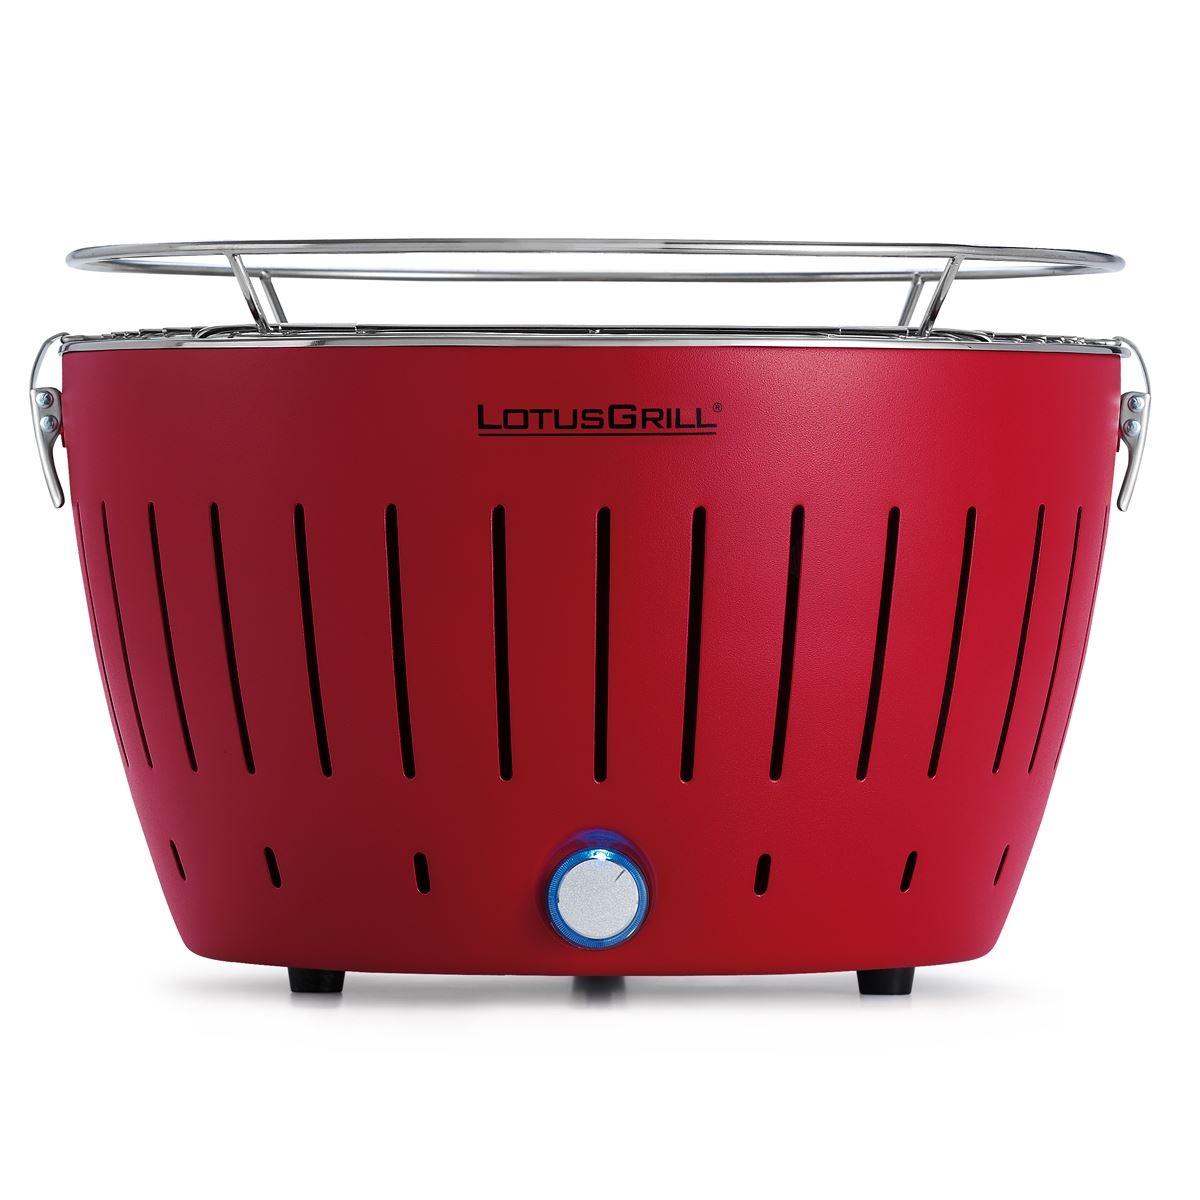 Does the LotusGrill come with charcoal and lighter fluid like it does on the manufacturer site?